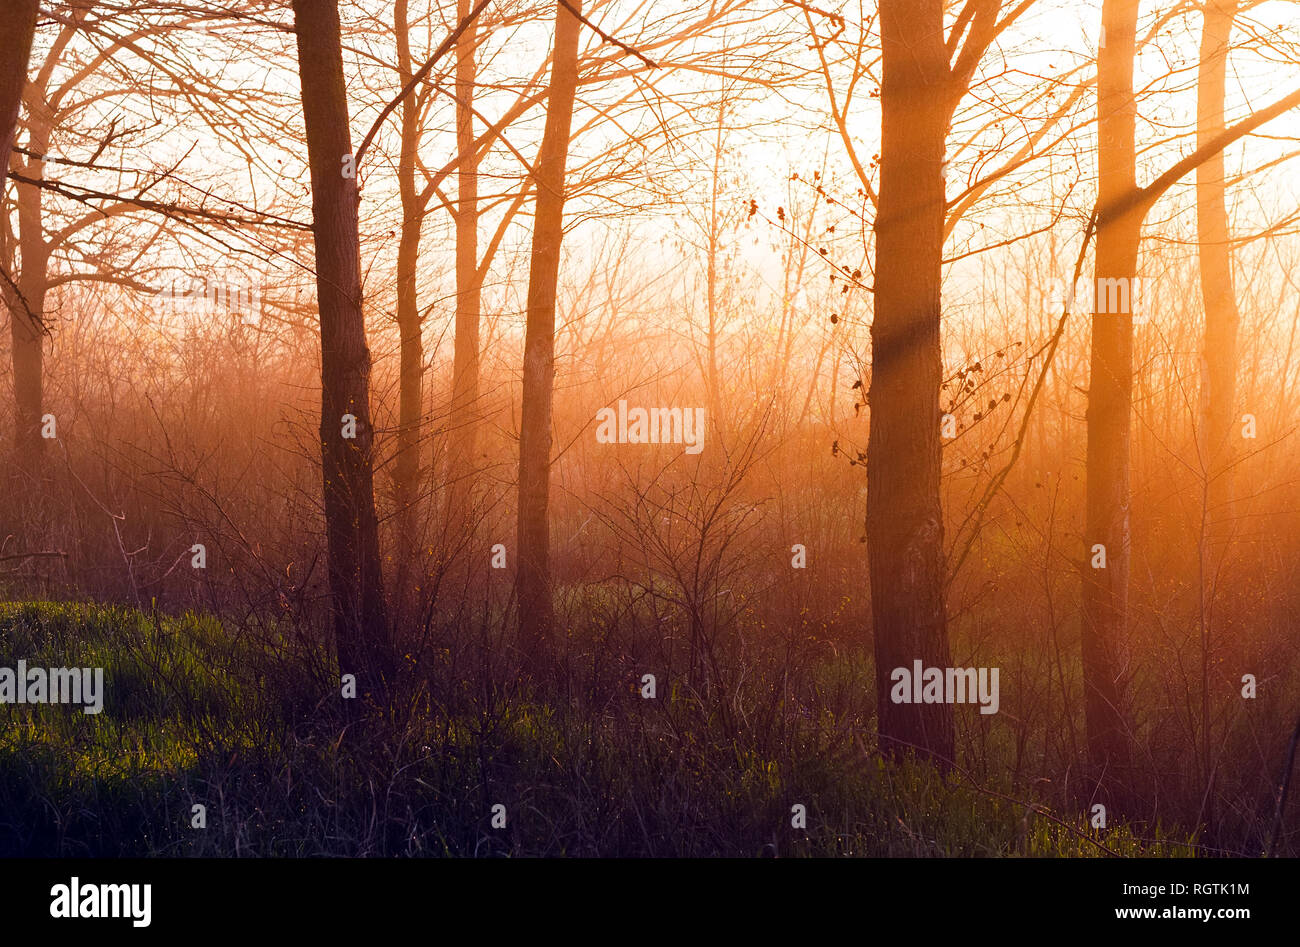 The sun's rays make their way through the trees in the forest at sunrise, background in orange and green tones Stock Photo